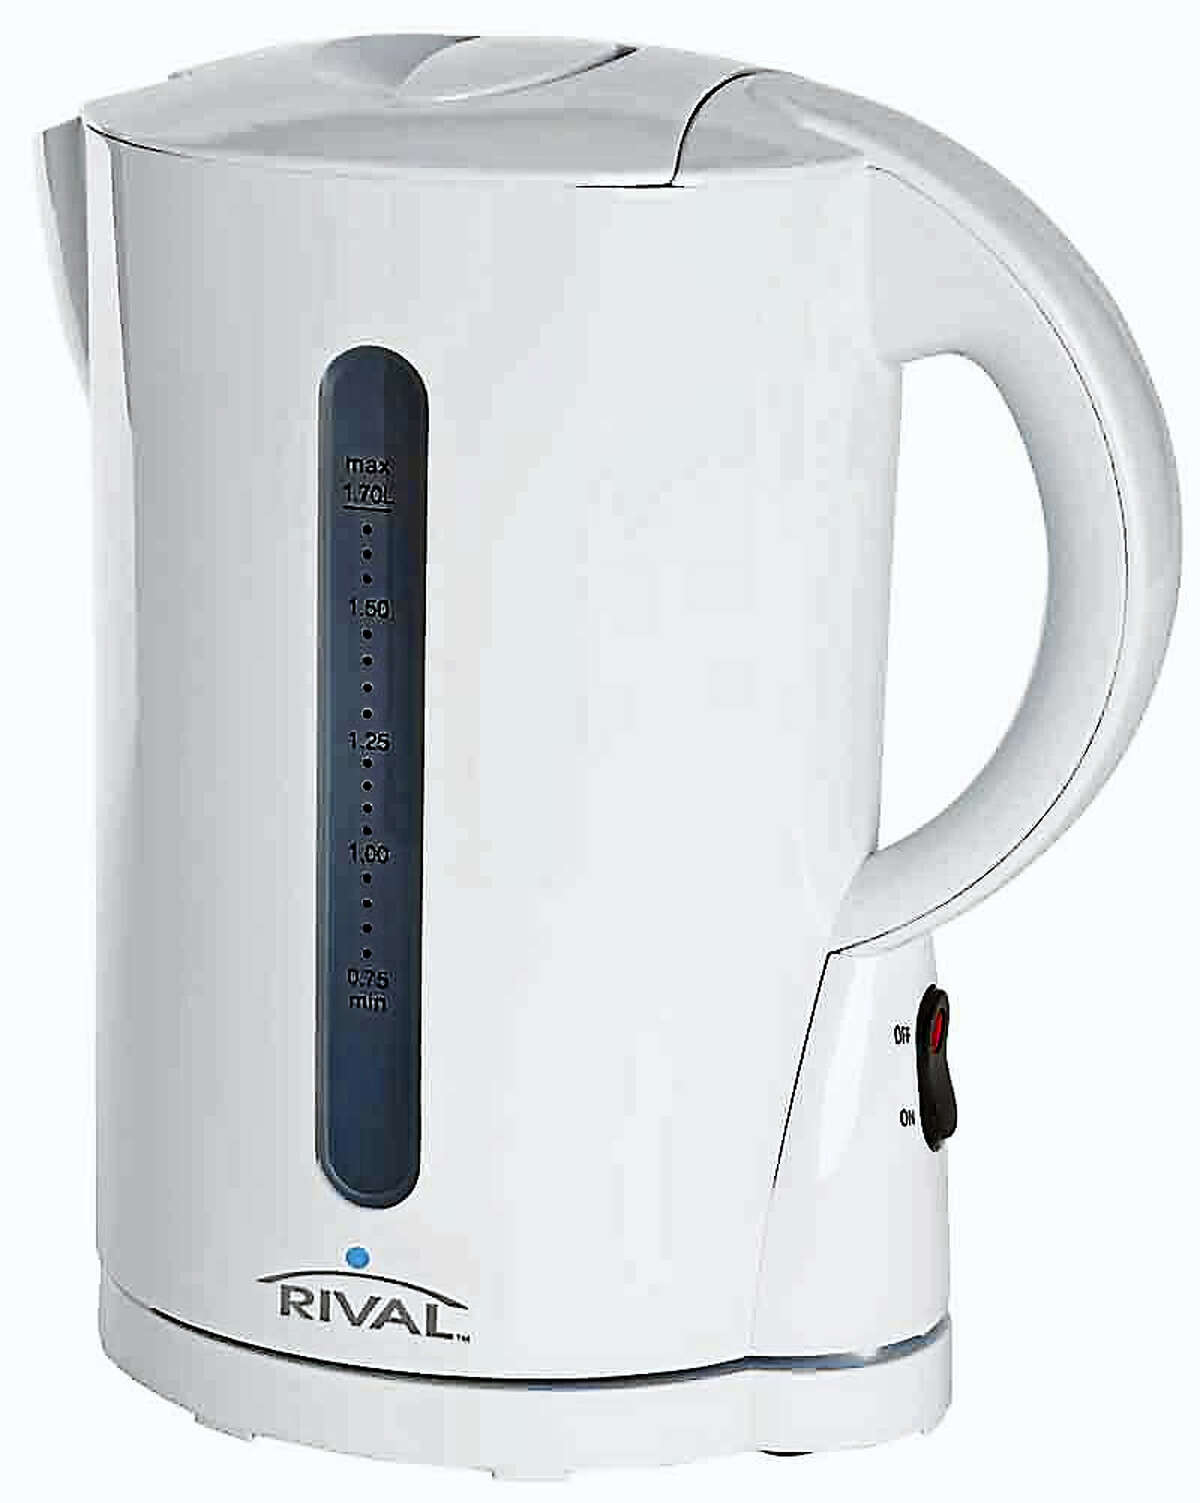 Photo courtesy of the U.S. Consumer Product Safety CommissionWalmart is recalling some 1.2 million Rival brand electrical kettles after dozens of reports of shock and burn incidents across the U.S.